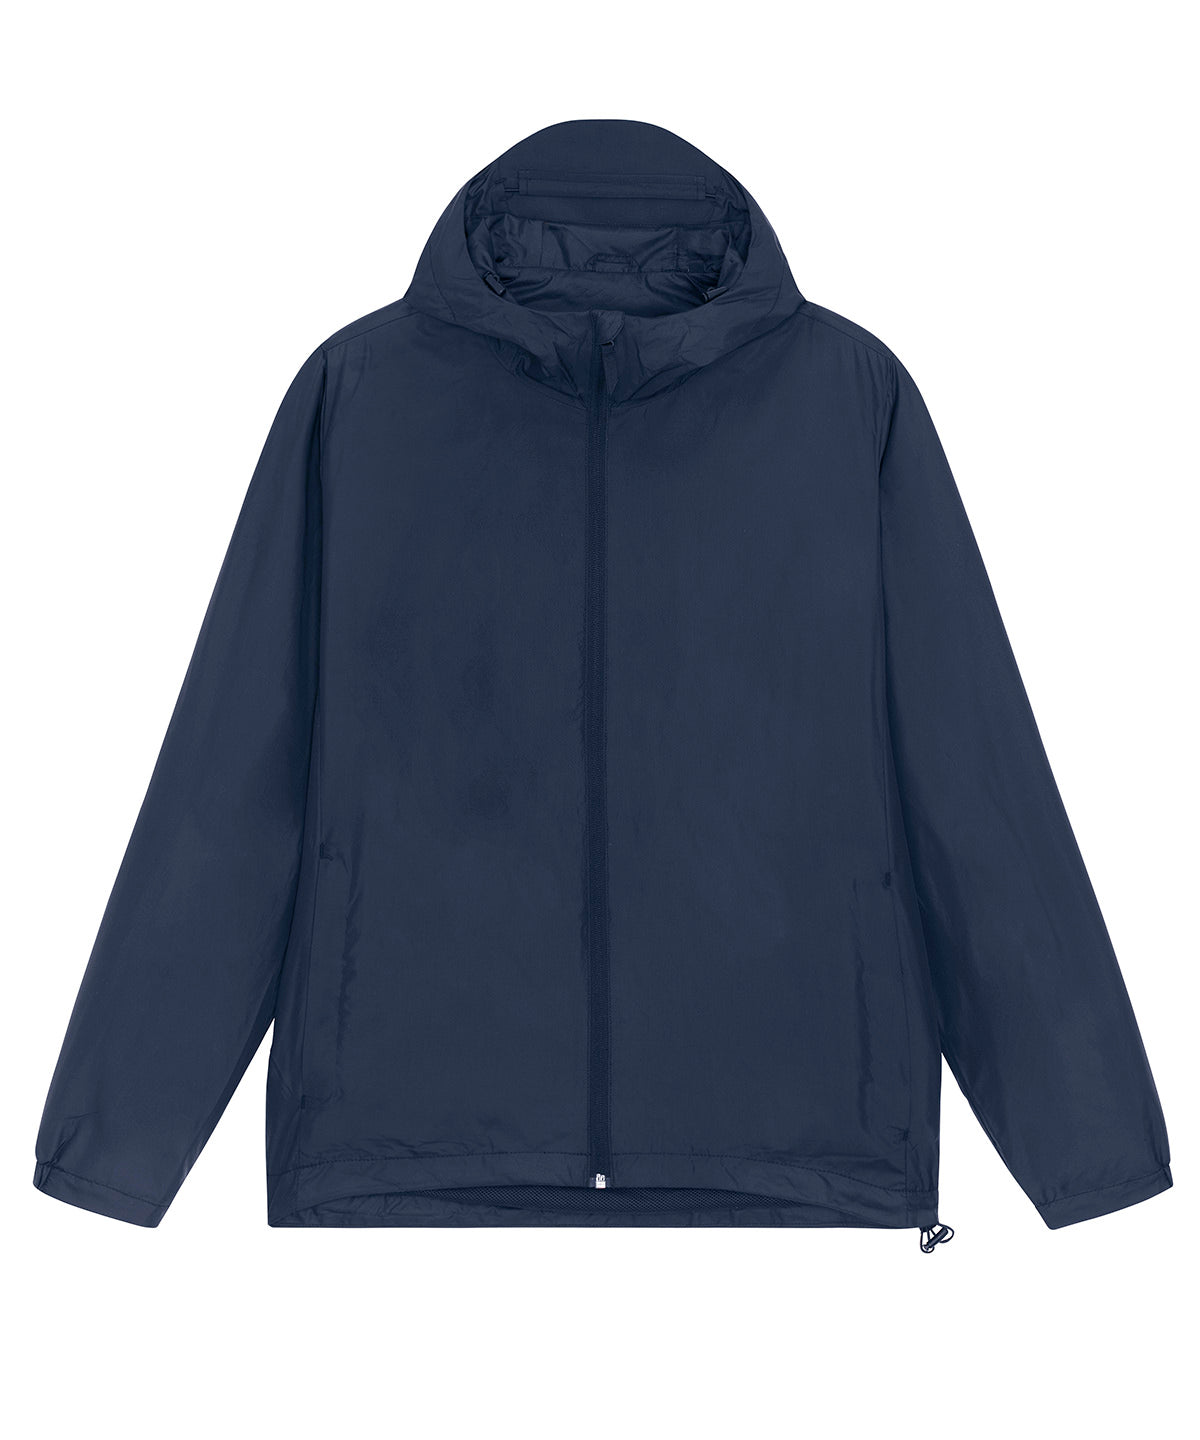 Stanley/Stella Commuter Multifunctional Jacket  French Navy